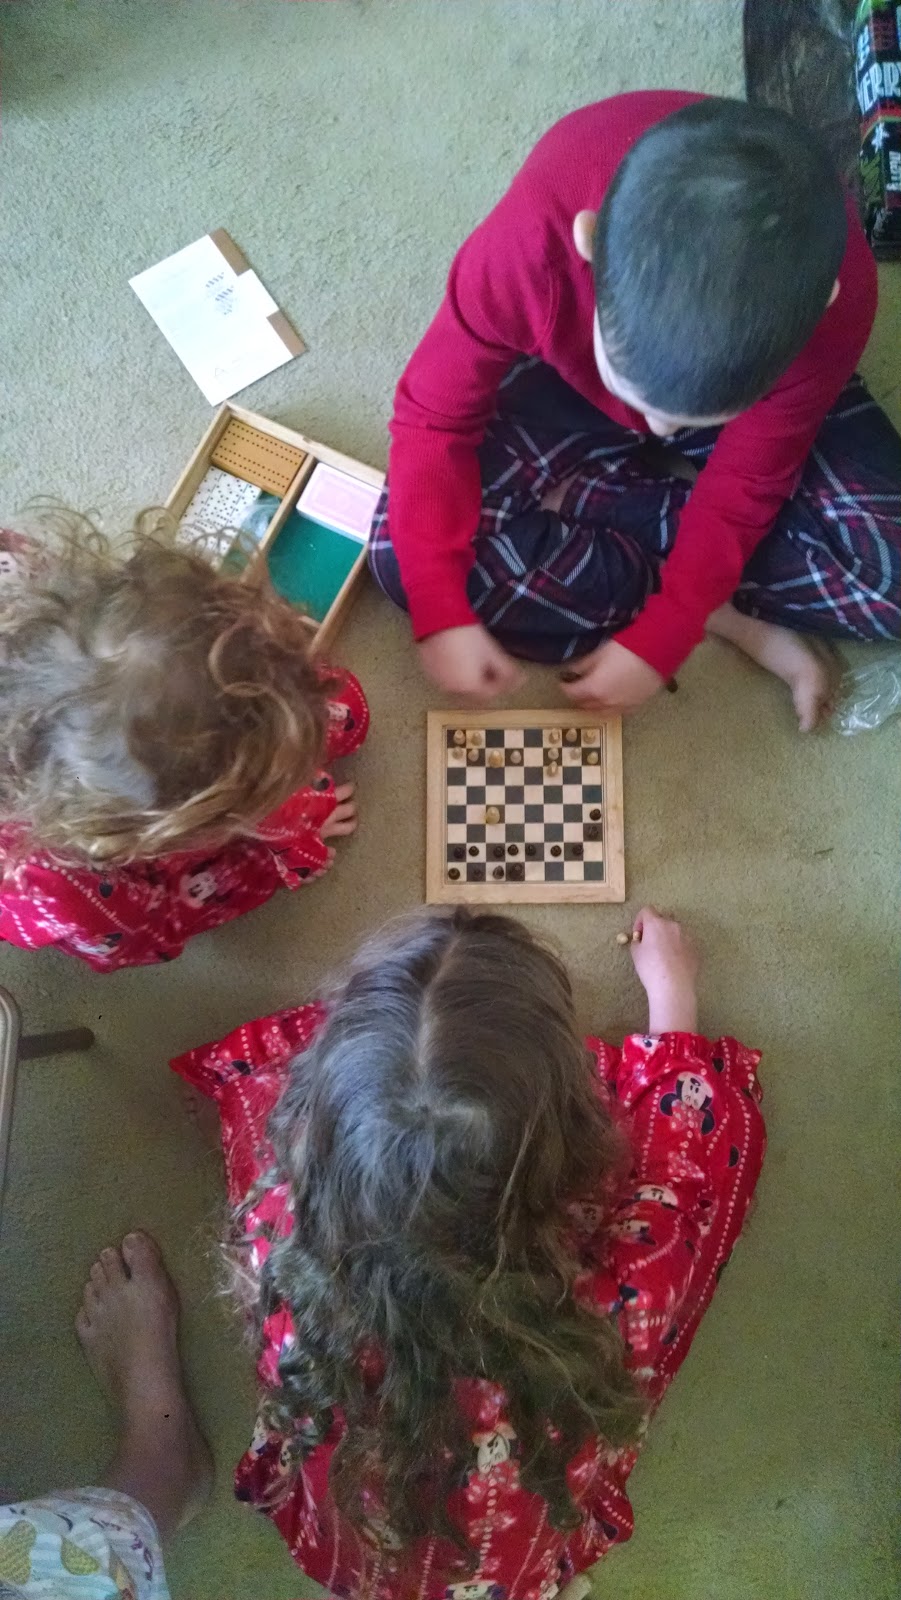 Wordless Wednesday:  Three for chess?